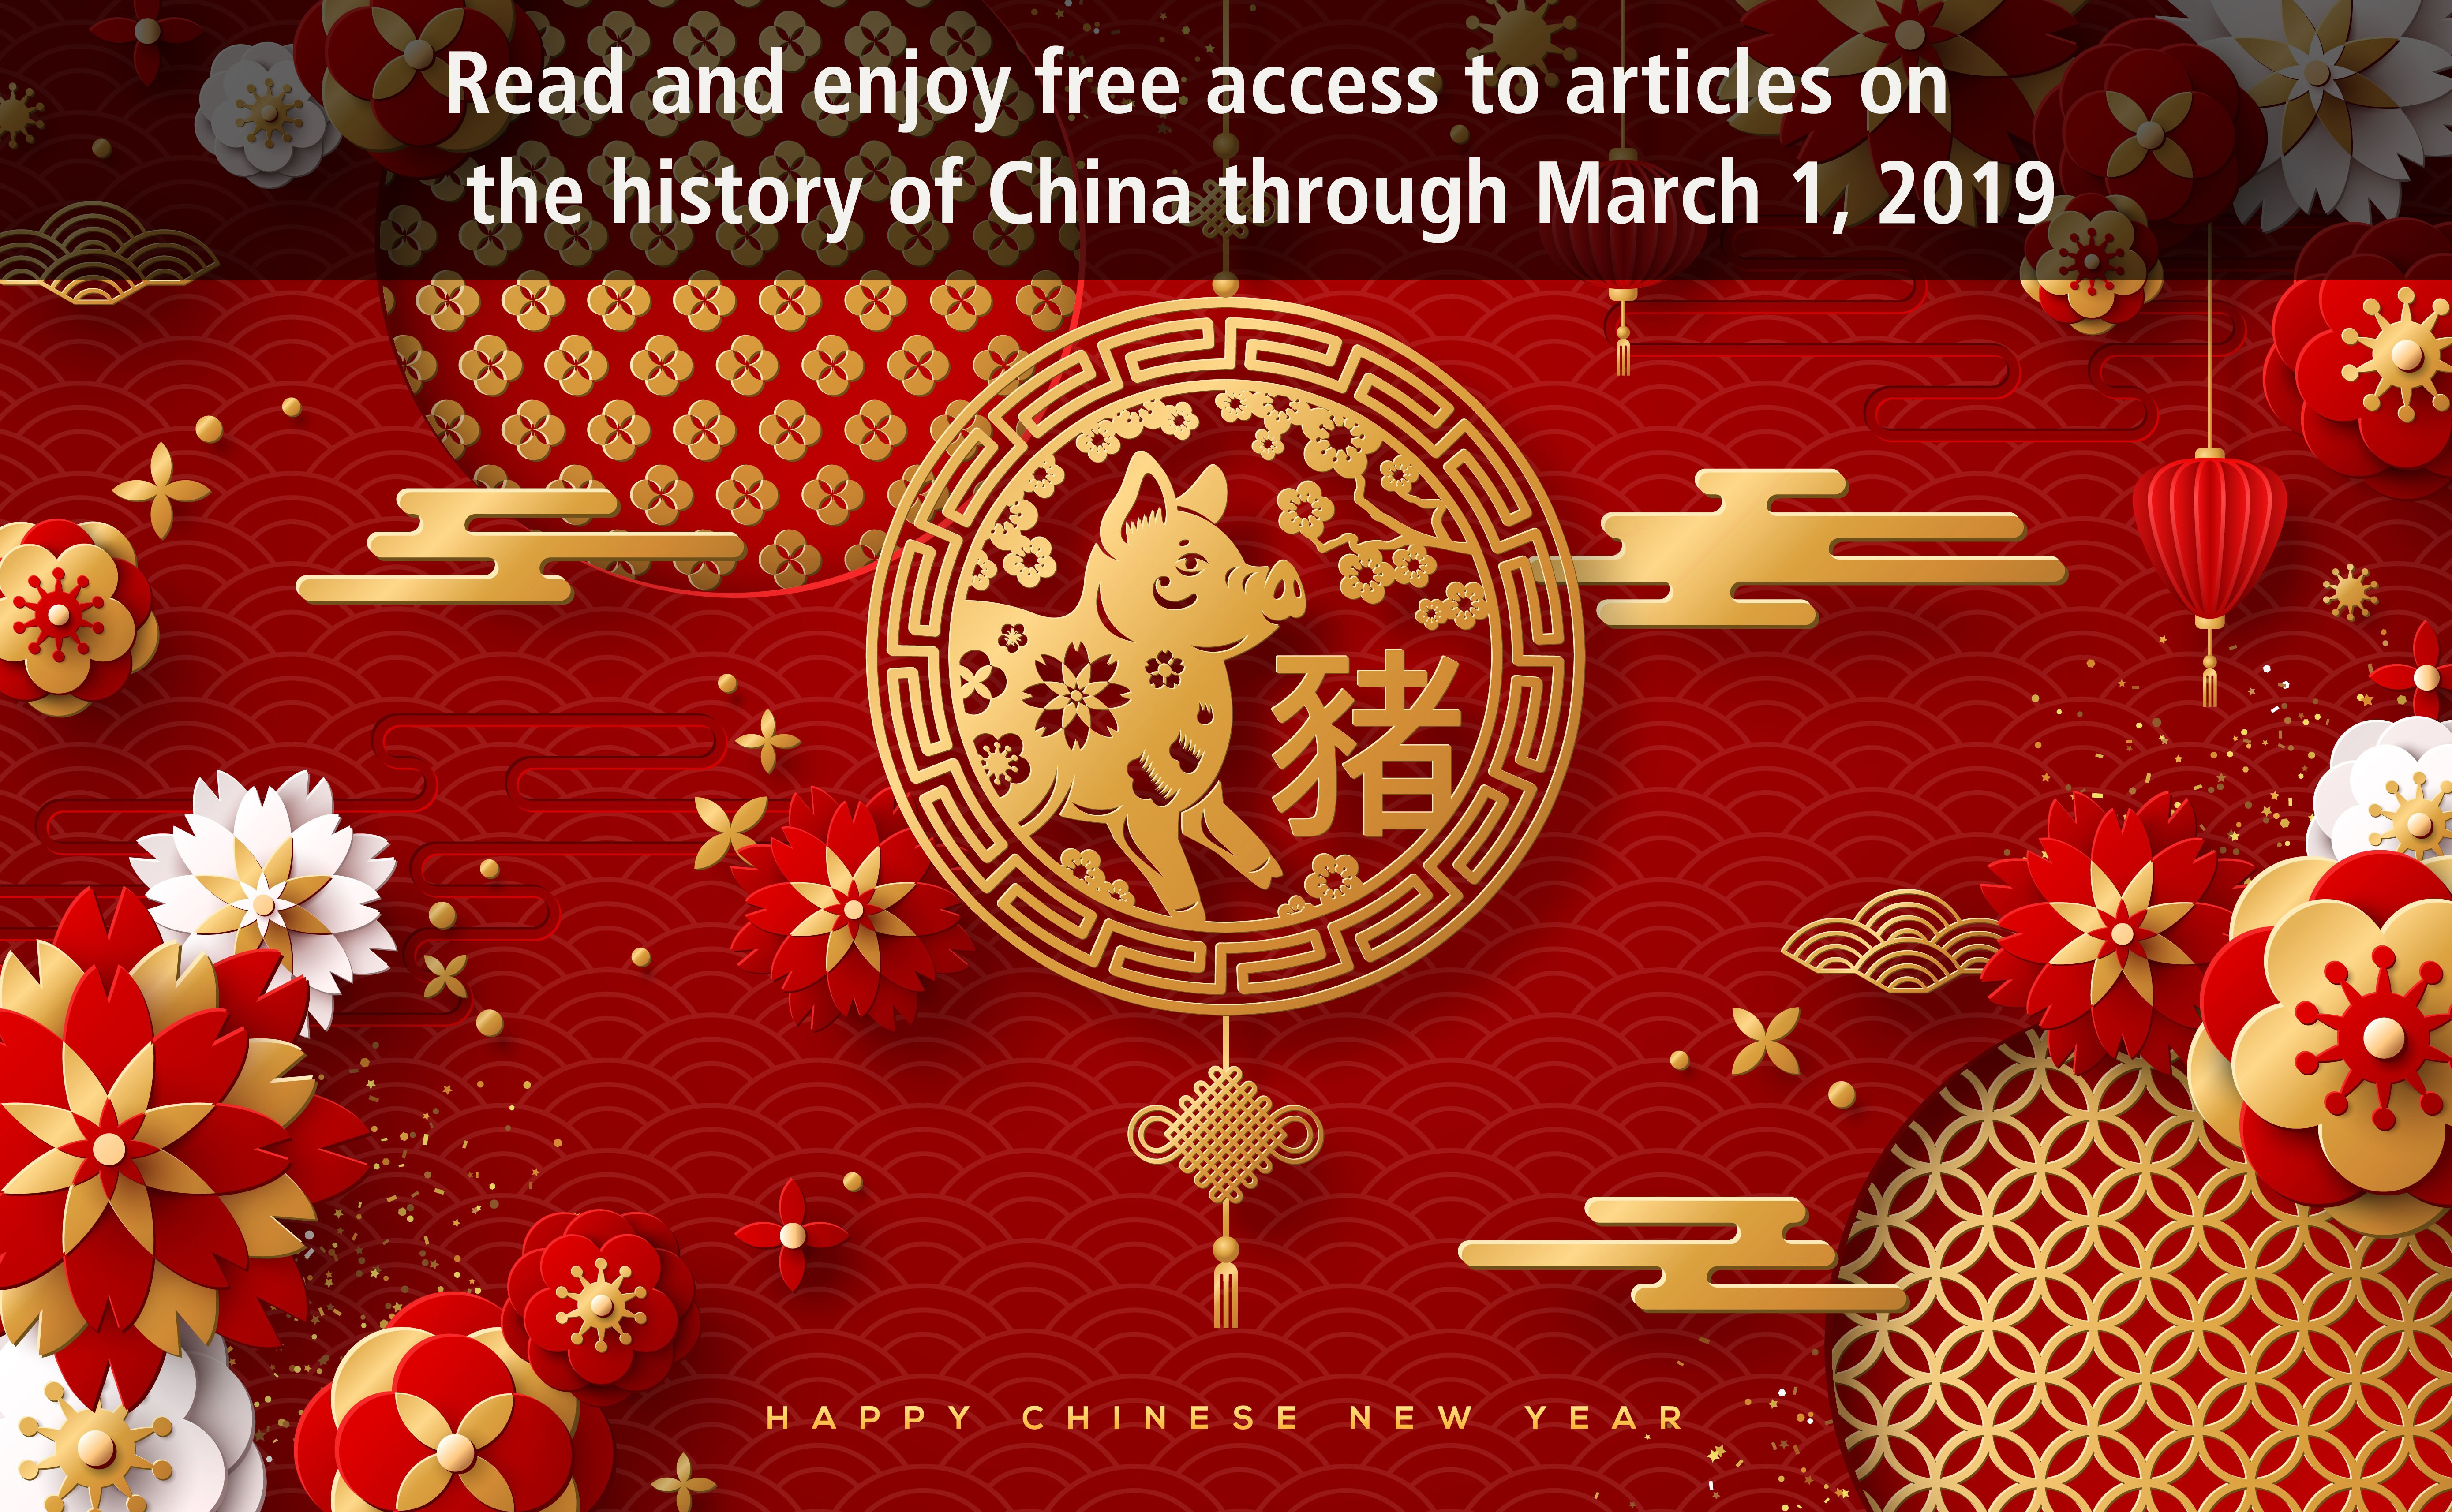 Chinese New Year 2019: Free Journals Articles Collection